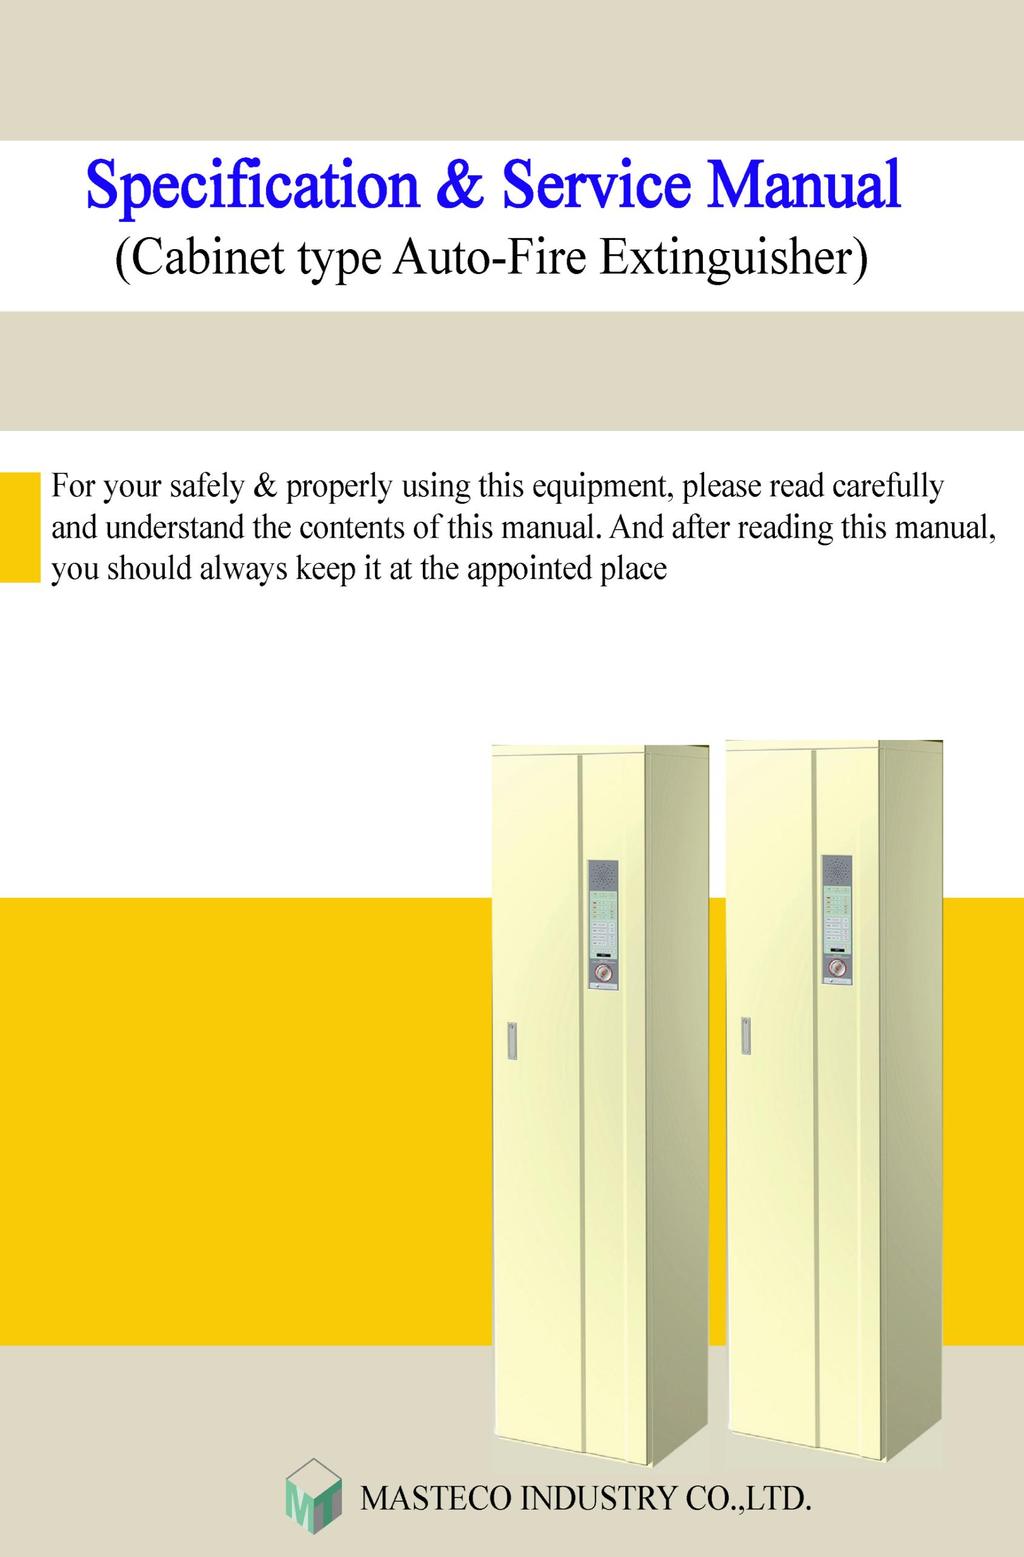 (Cabinet Automatic Fire Extinguishing System) For your safety and proper use of this equipment, please read carefully and understand the contents of this manual.